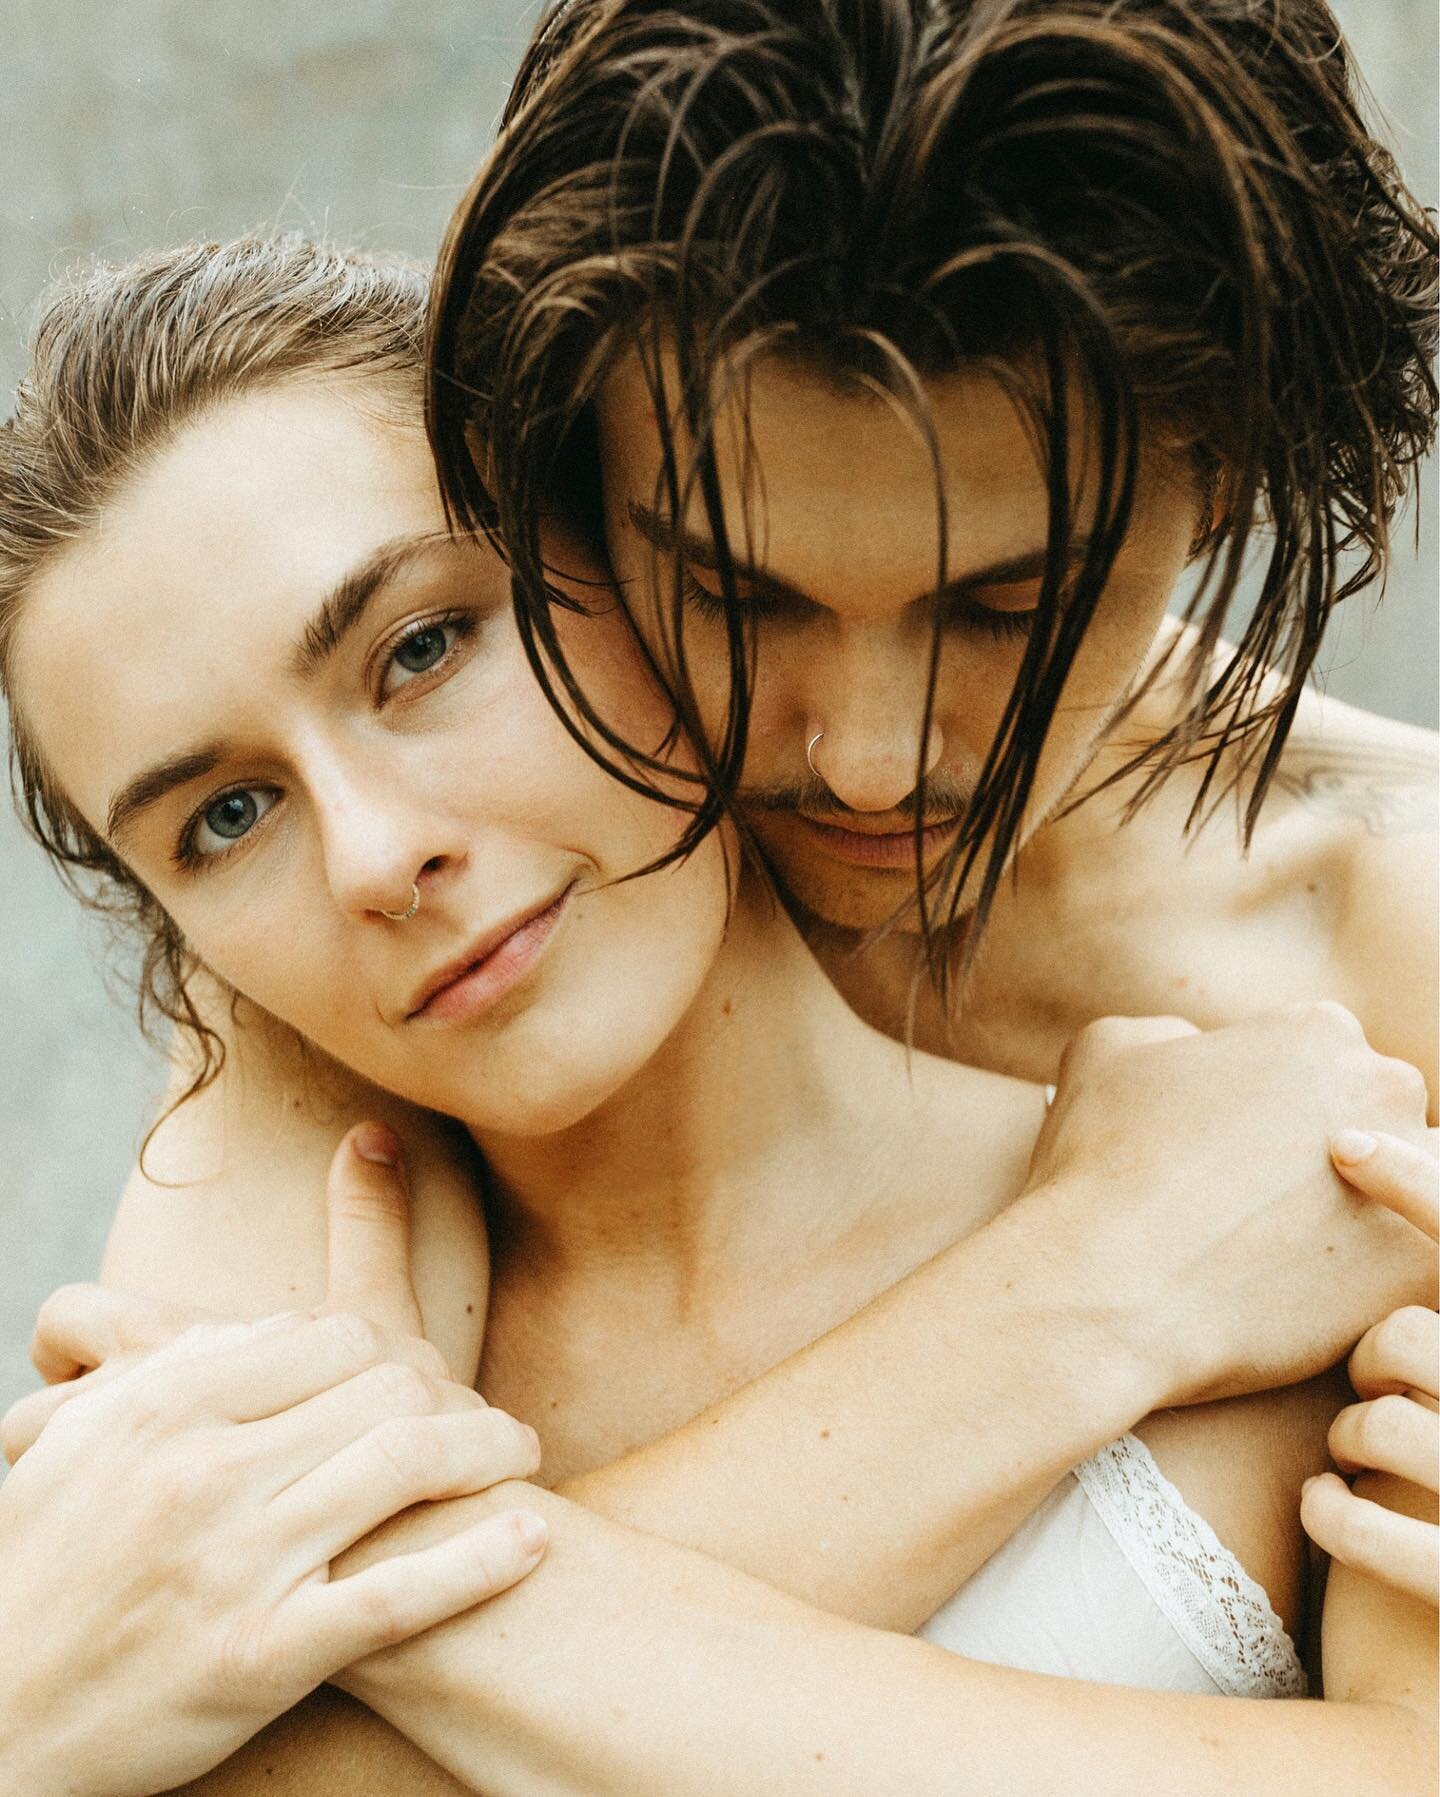 it&rsquo;s rare that i get two people to play in the rain, in the bottom of a ten foot skate bowl and who make it look this sensual and effortless so&hellip;we did it and it was really beautiful and makes me want to do more shoots in the rain.

part 